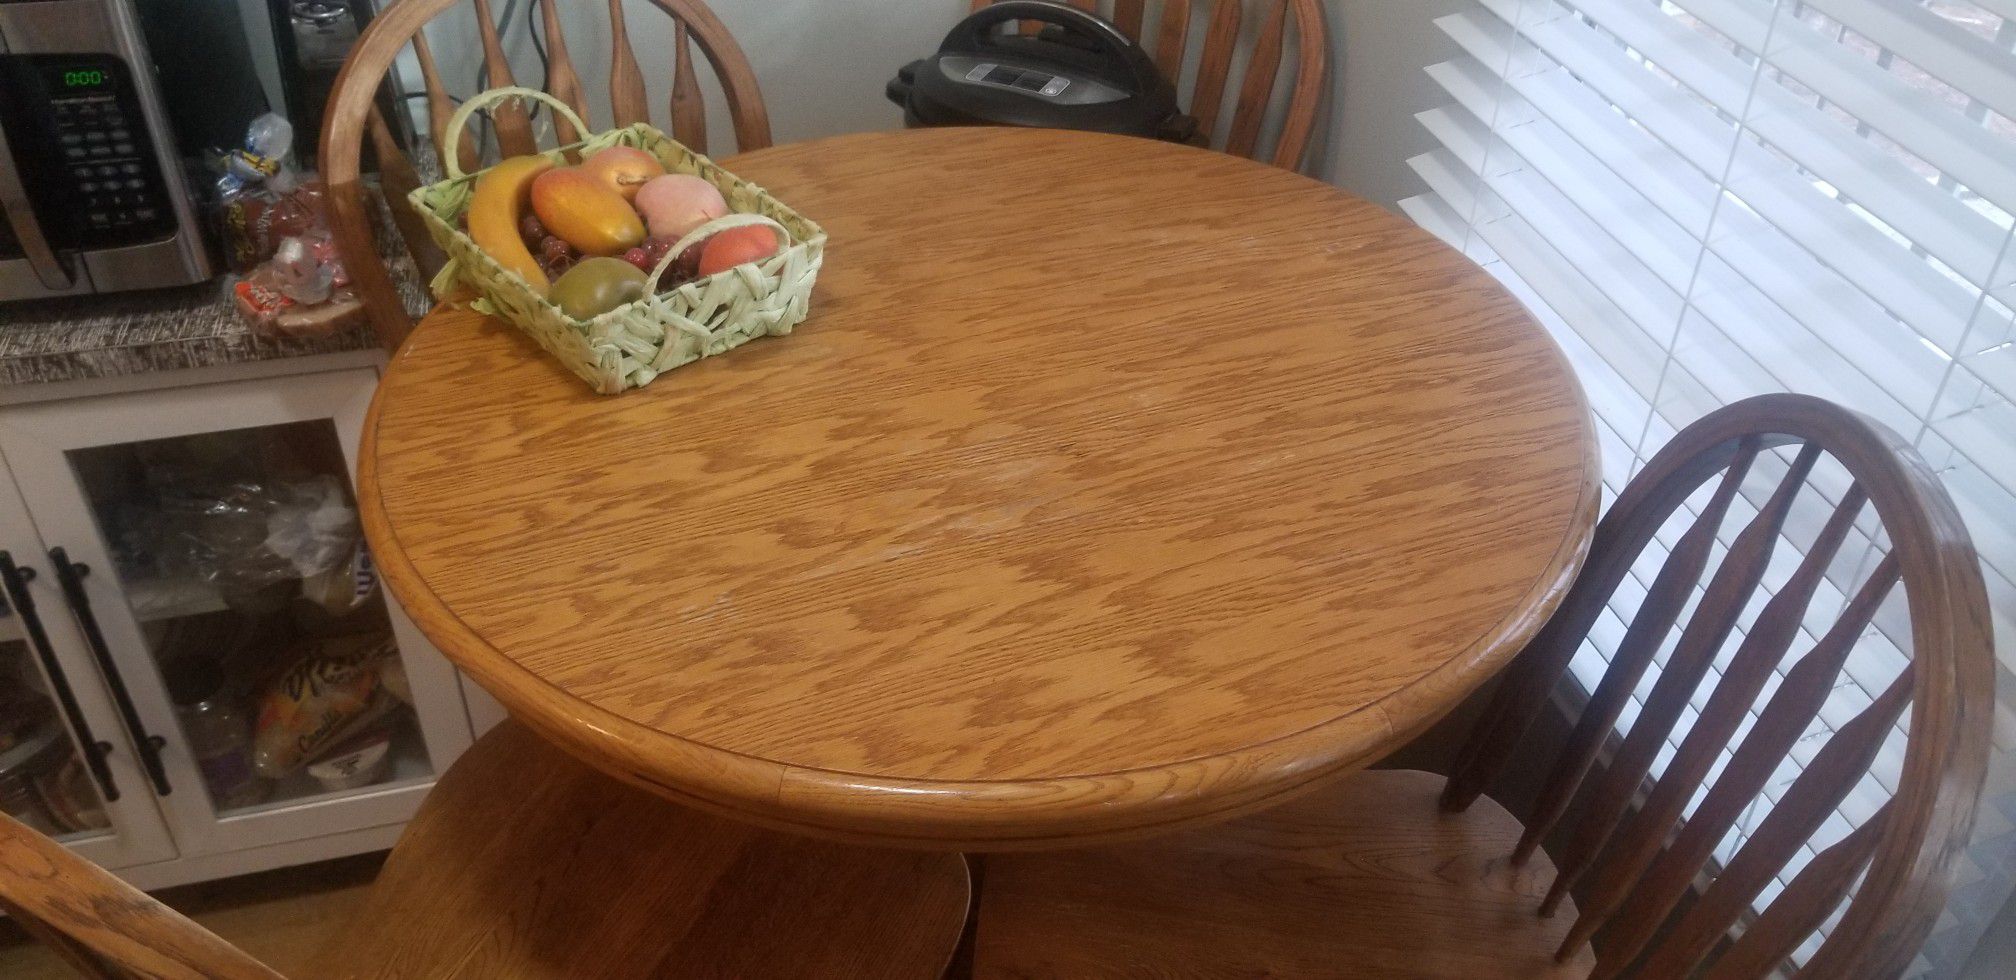 Tall Kitchen Table with 4 chairs that swivels